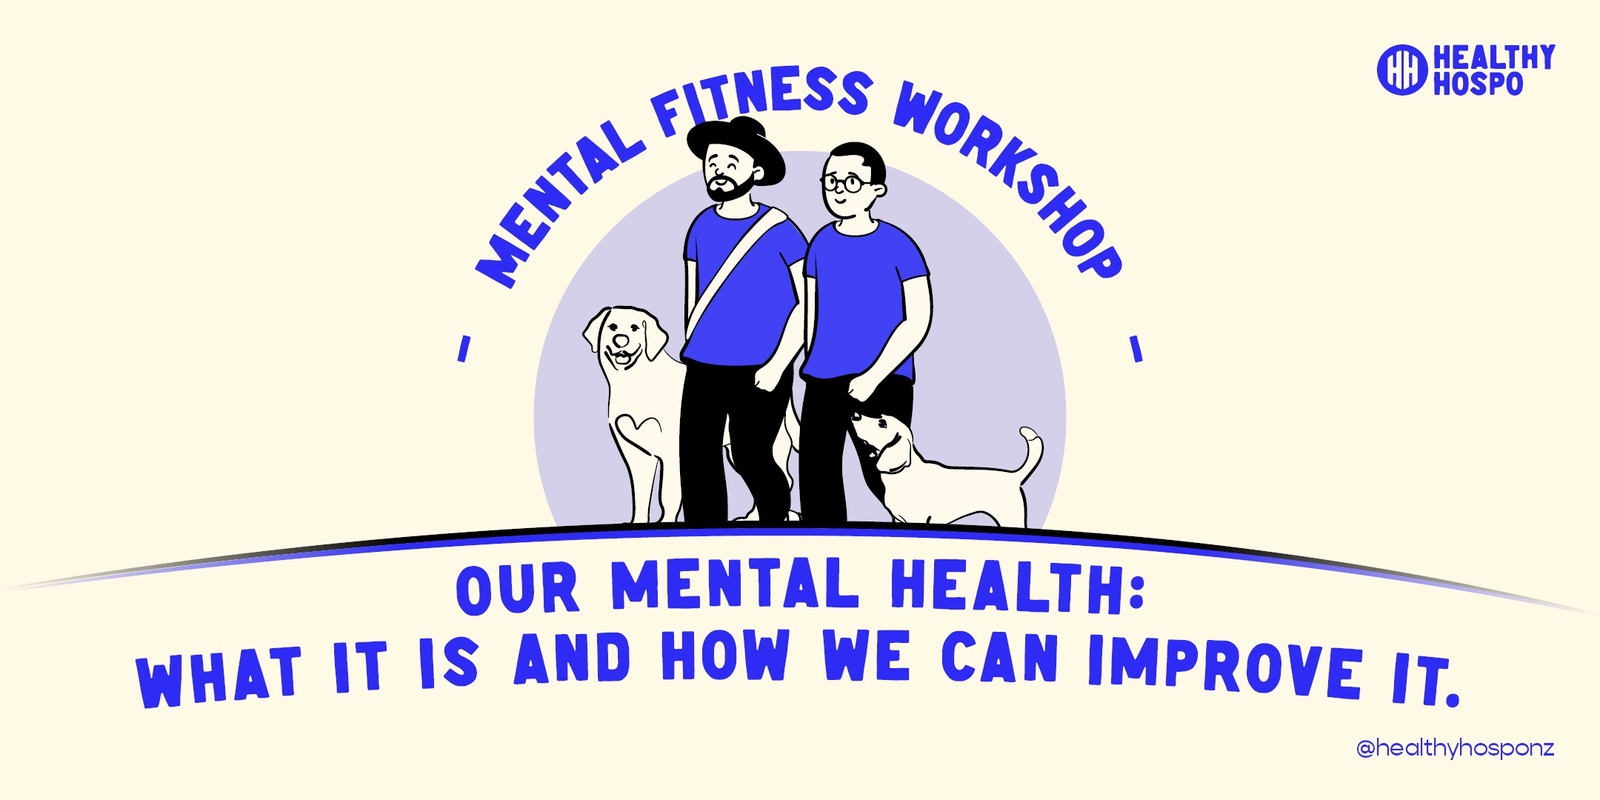 Banner image for CROMWELL: Harvest Hotel and Healthy Hospo present Our Mental Health: What is it & how we can improve it